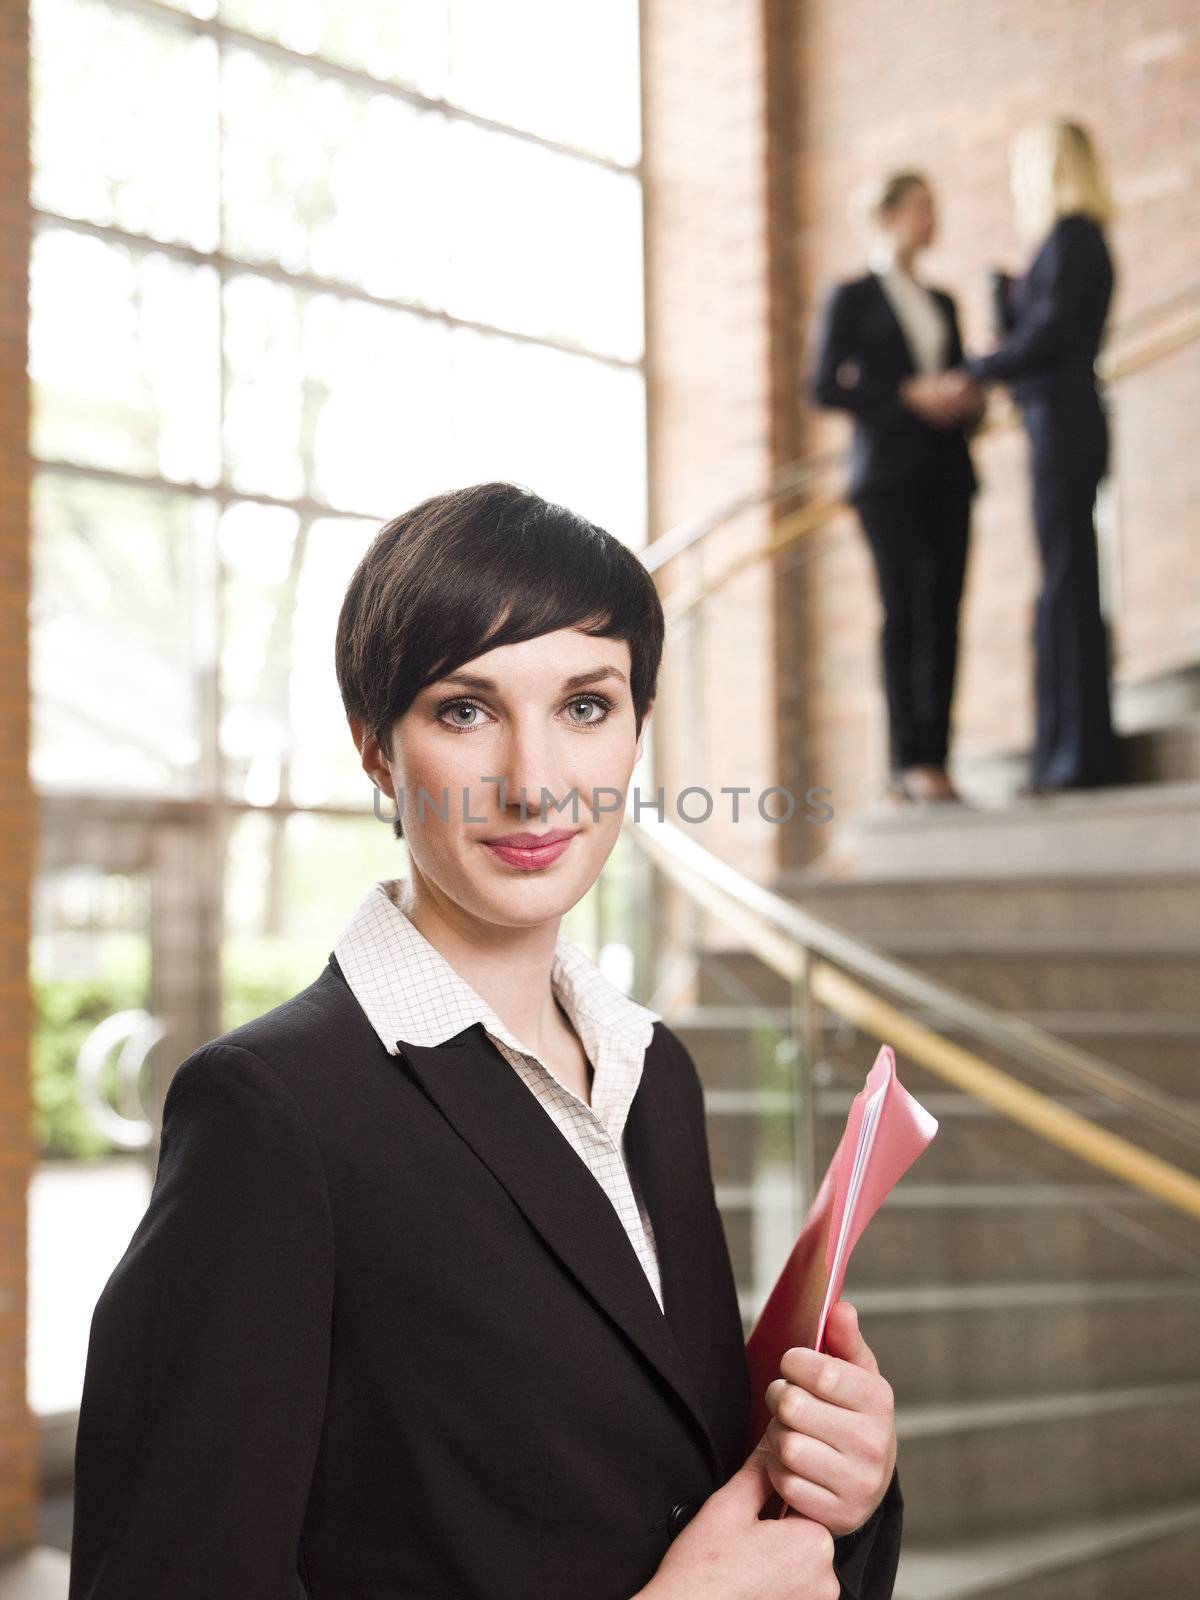 Businesswoman in front of two women in the stairs by gemenacom